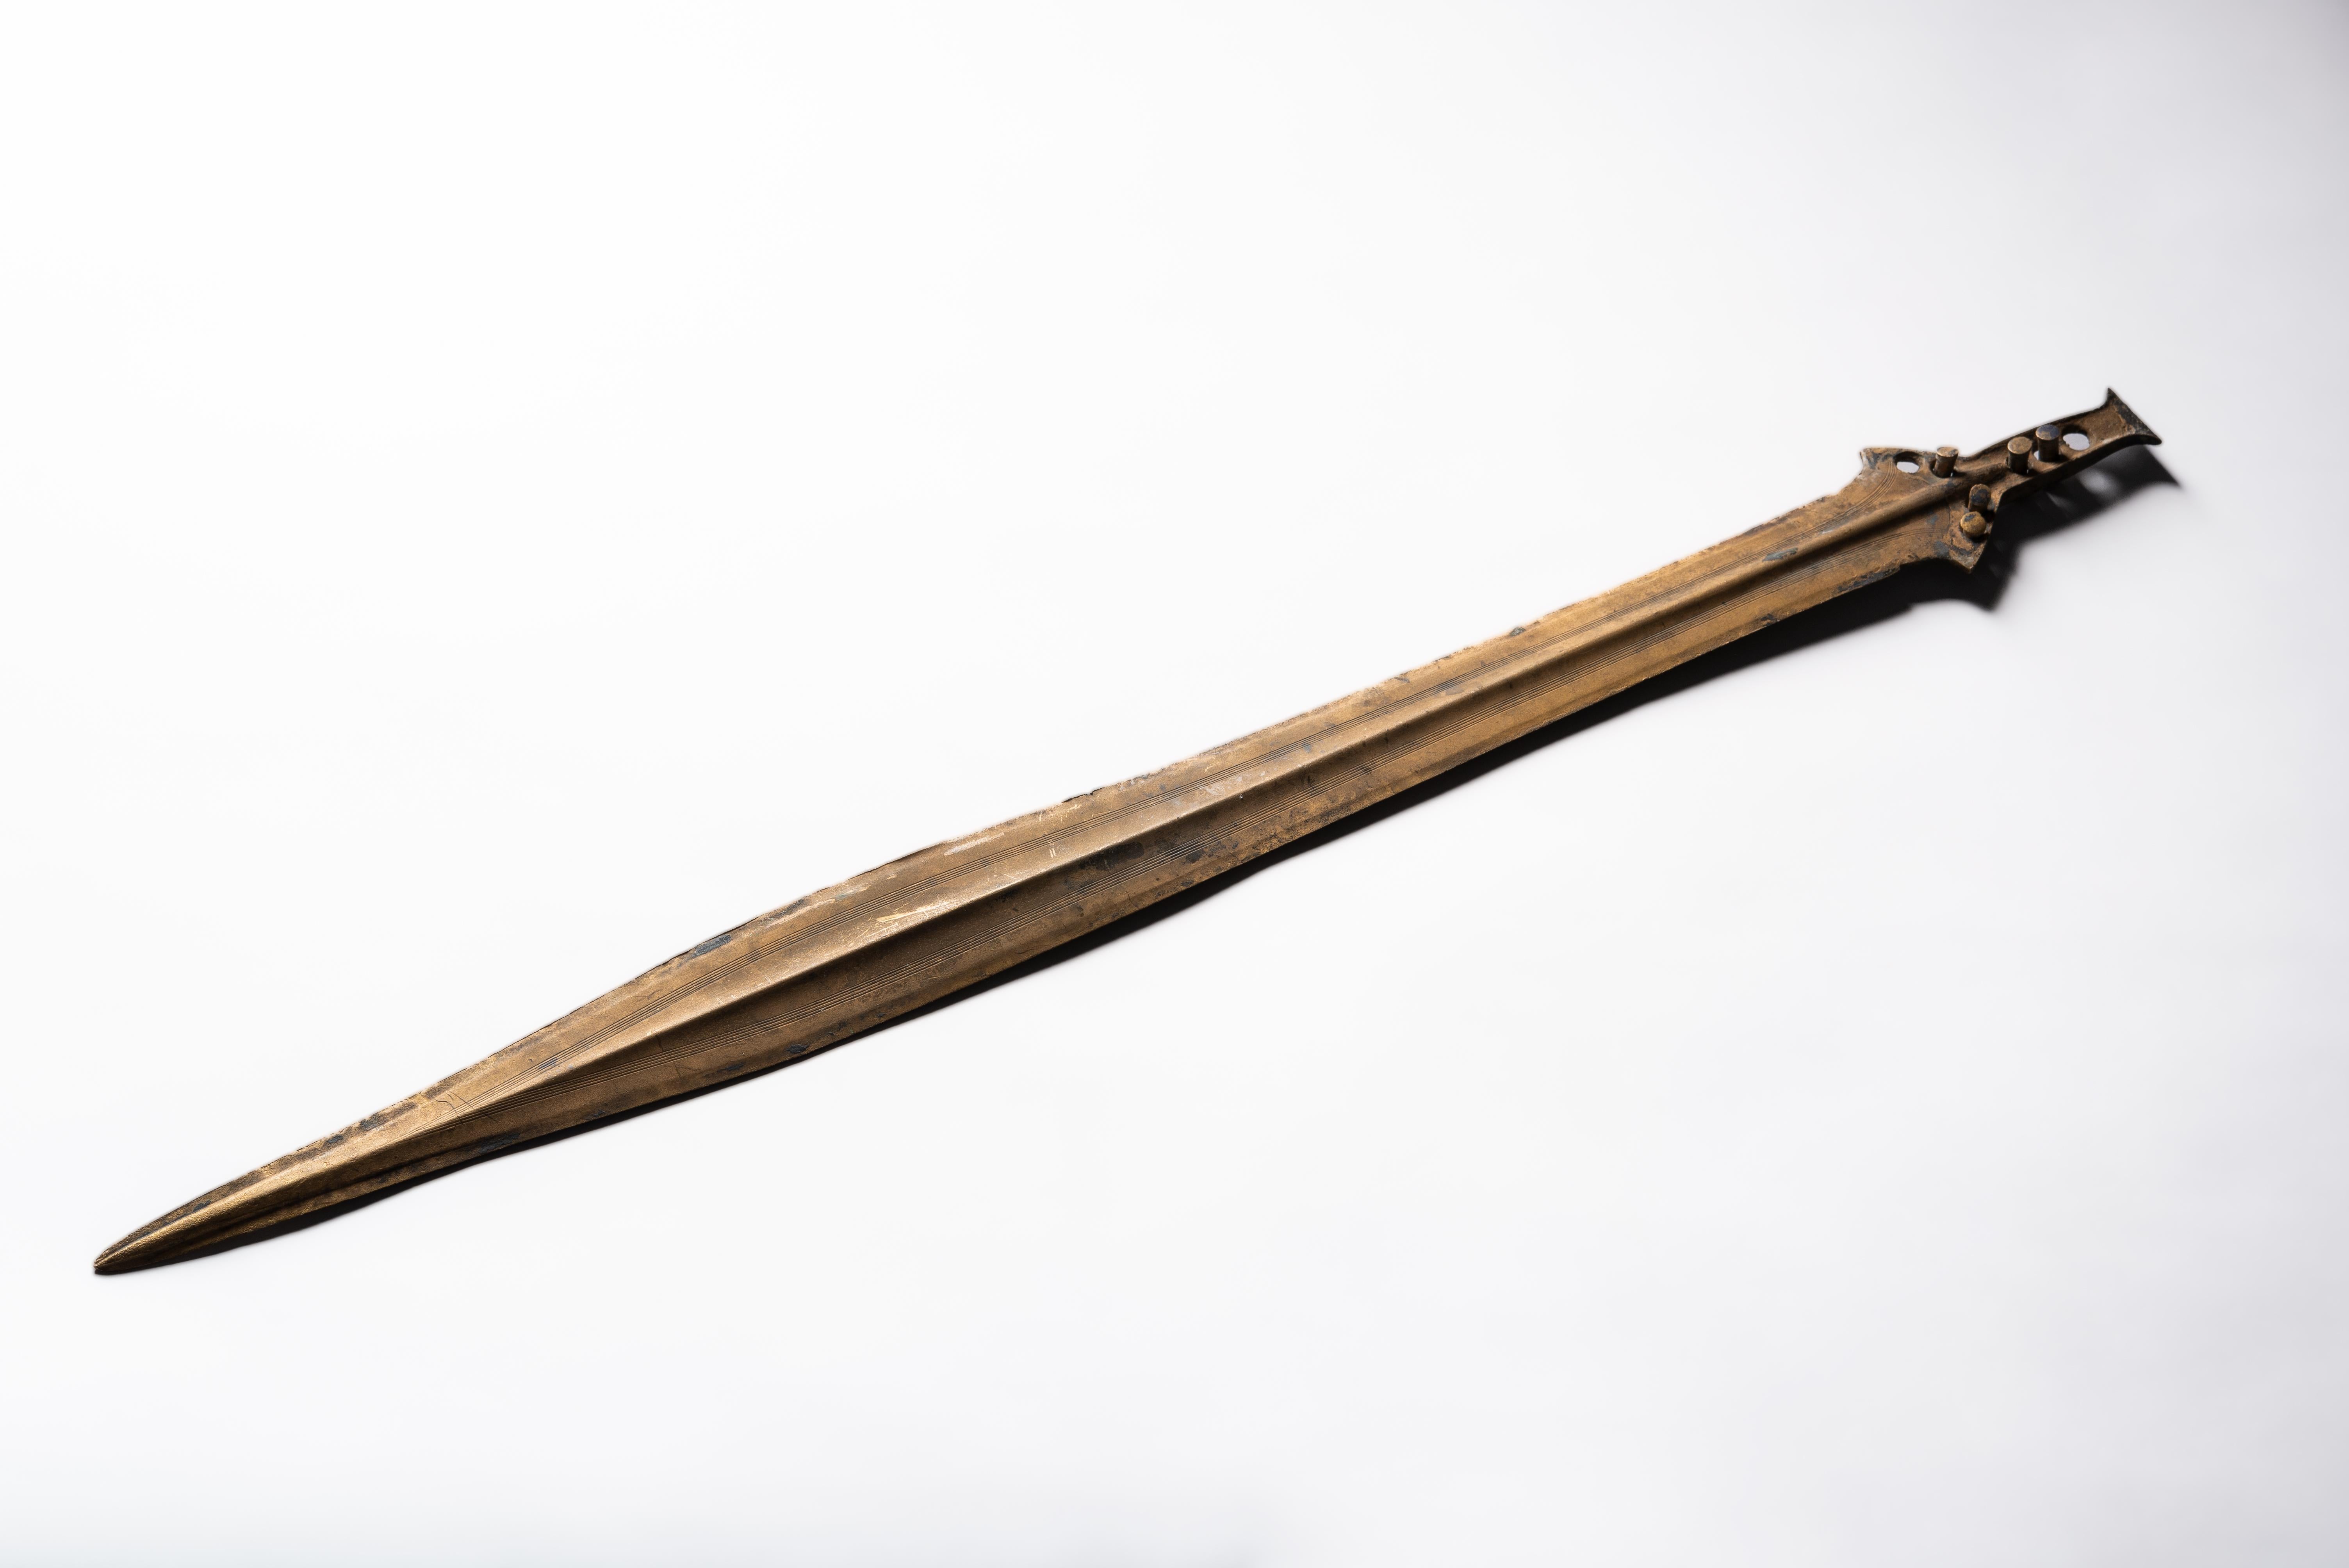 Saint Nazaire Sword, Late Bronze Age, circa 800-900 B.C.

An exceptionally well preserved Bronze Age sword, with elegant, finely incised decorations, near perfect form and a wonderful, golden patina. Subtly leaf shaped and tapering to a fine